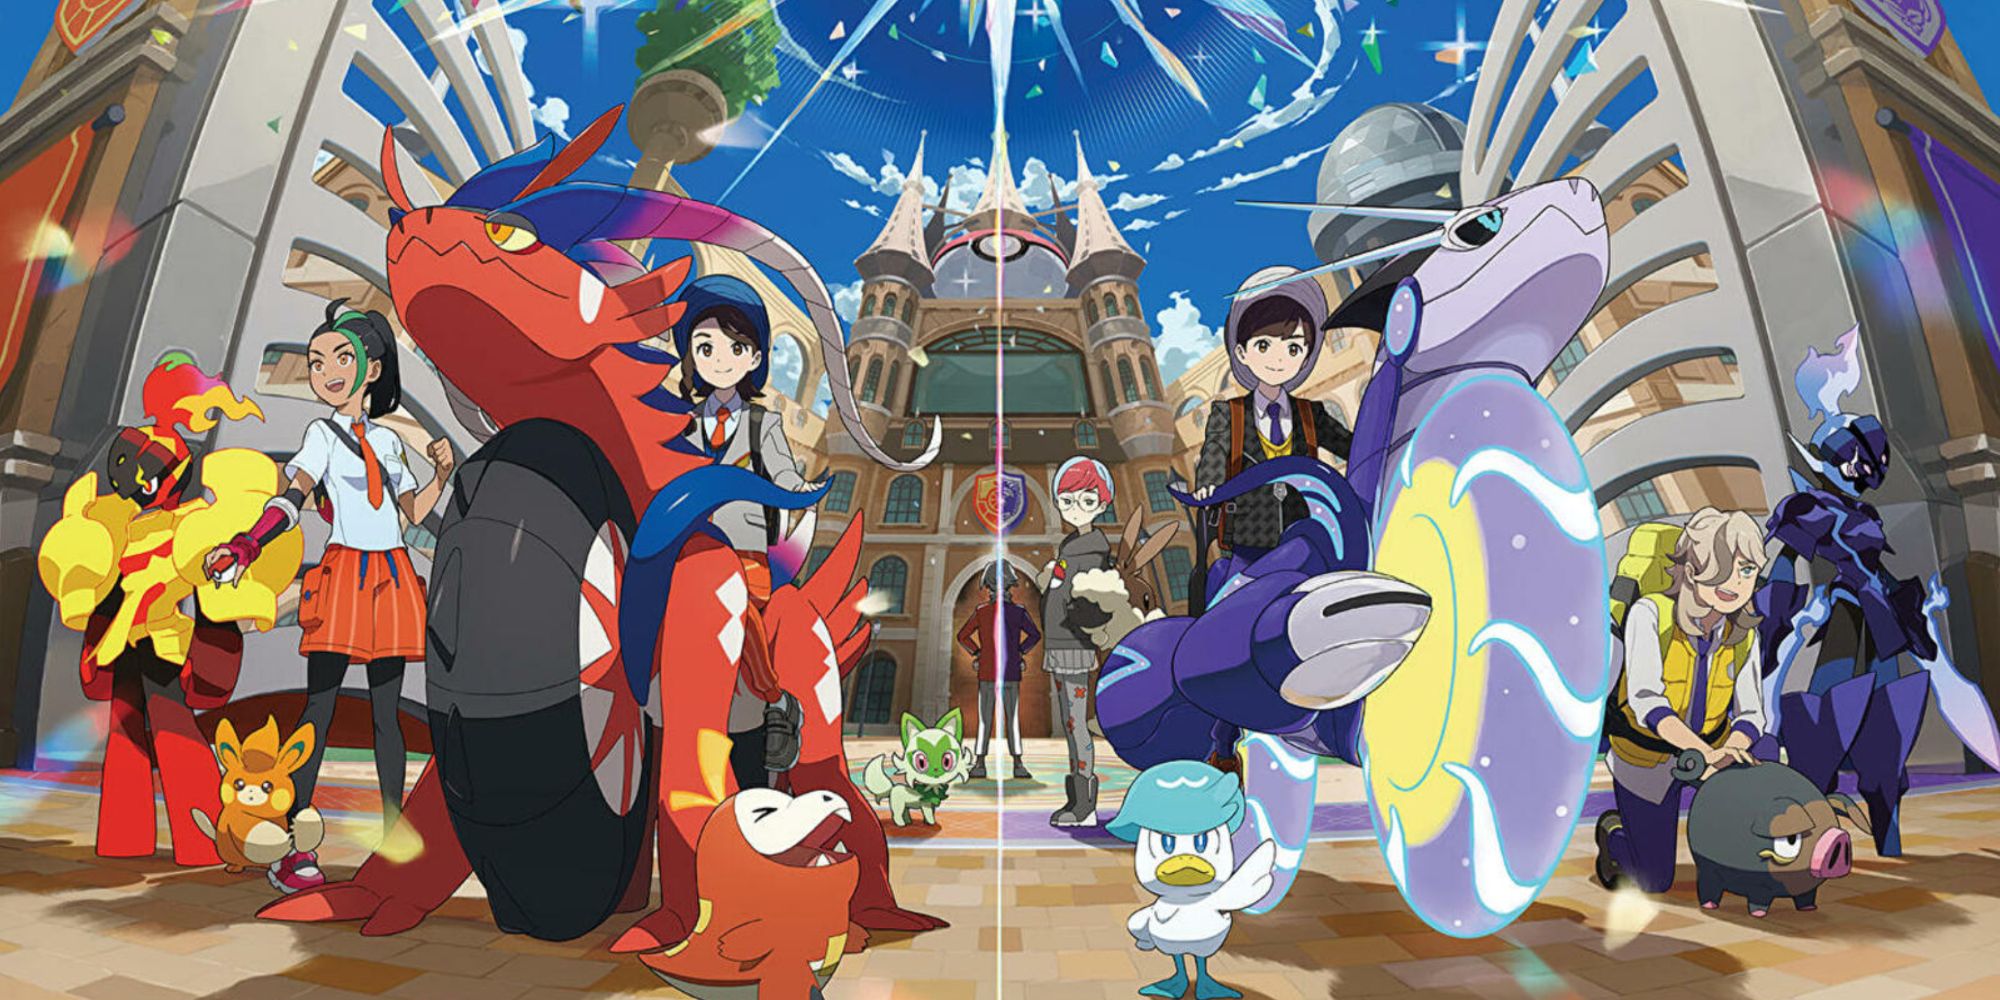 Pokemon Scarlet and Violet: The trainers stand in front of the academy